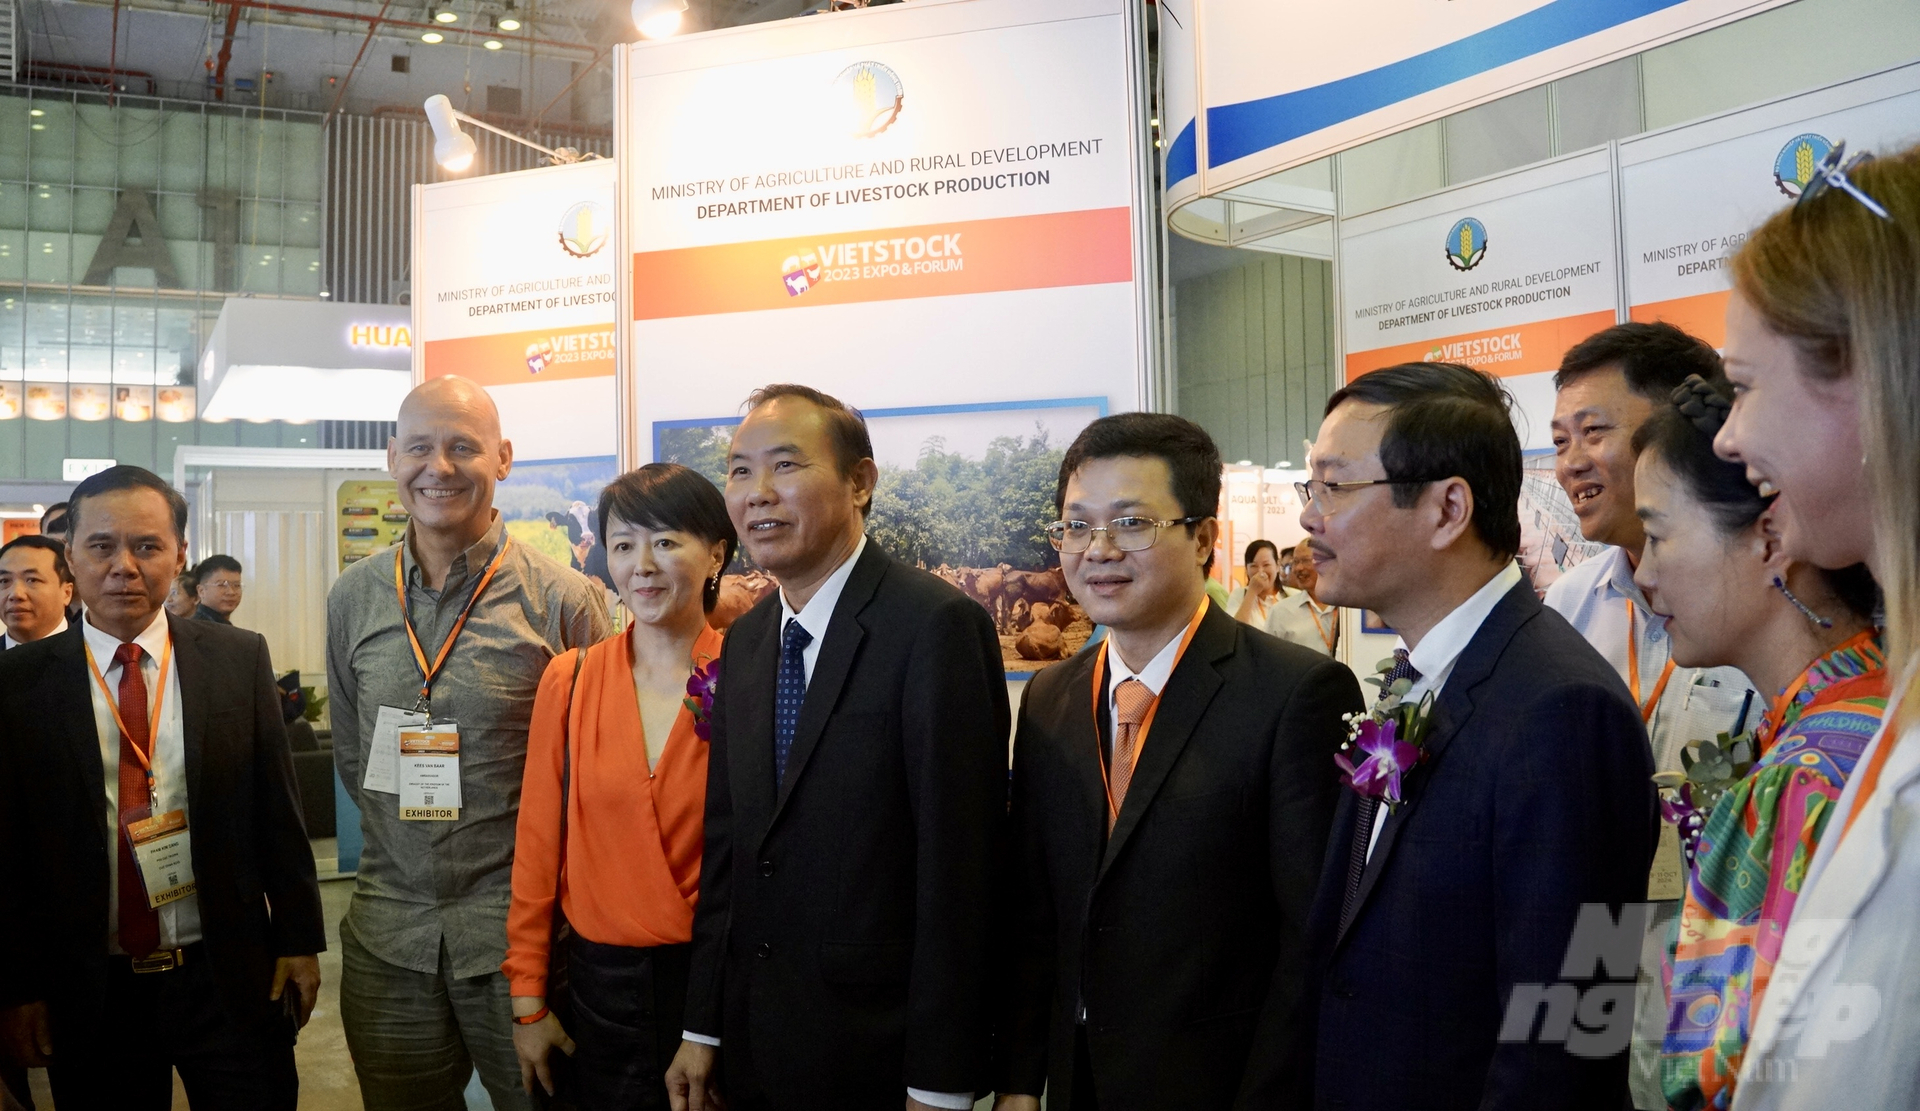 Deputy Minister Phung Duc Tien and delegates visited the booths. Photo: Nguyen Thuy.